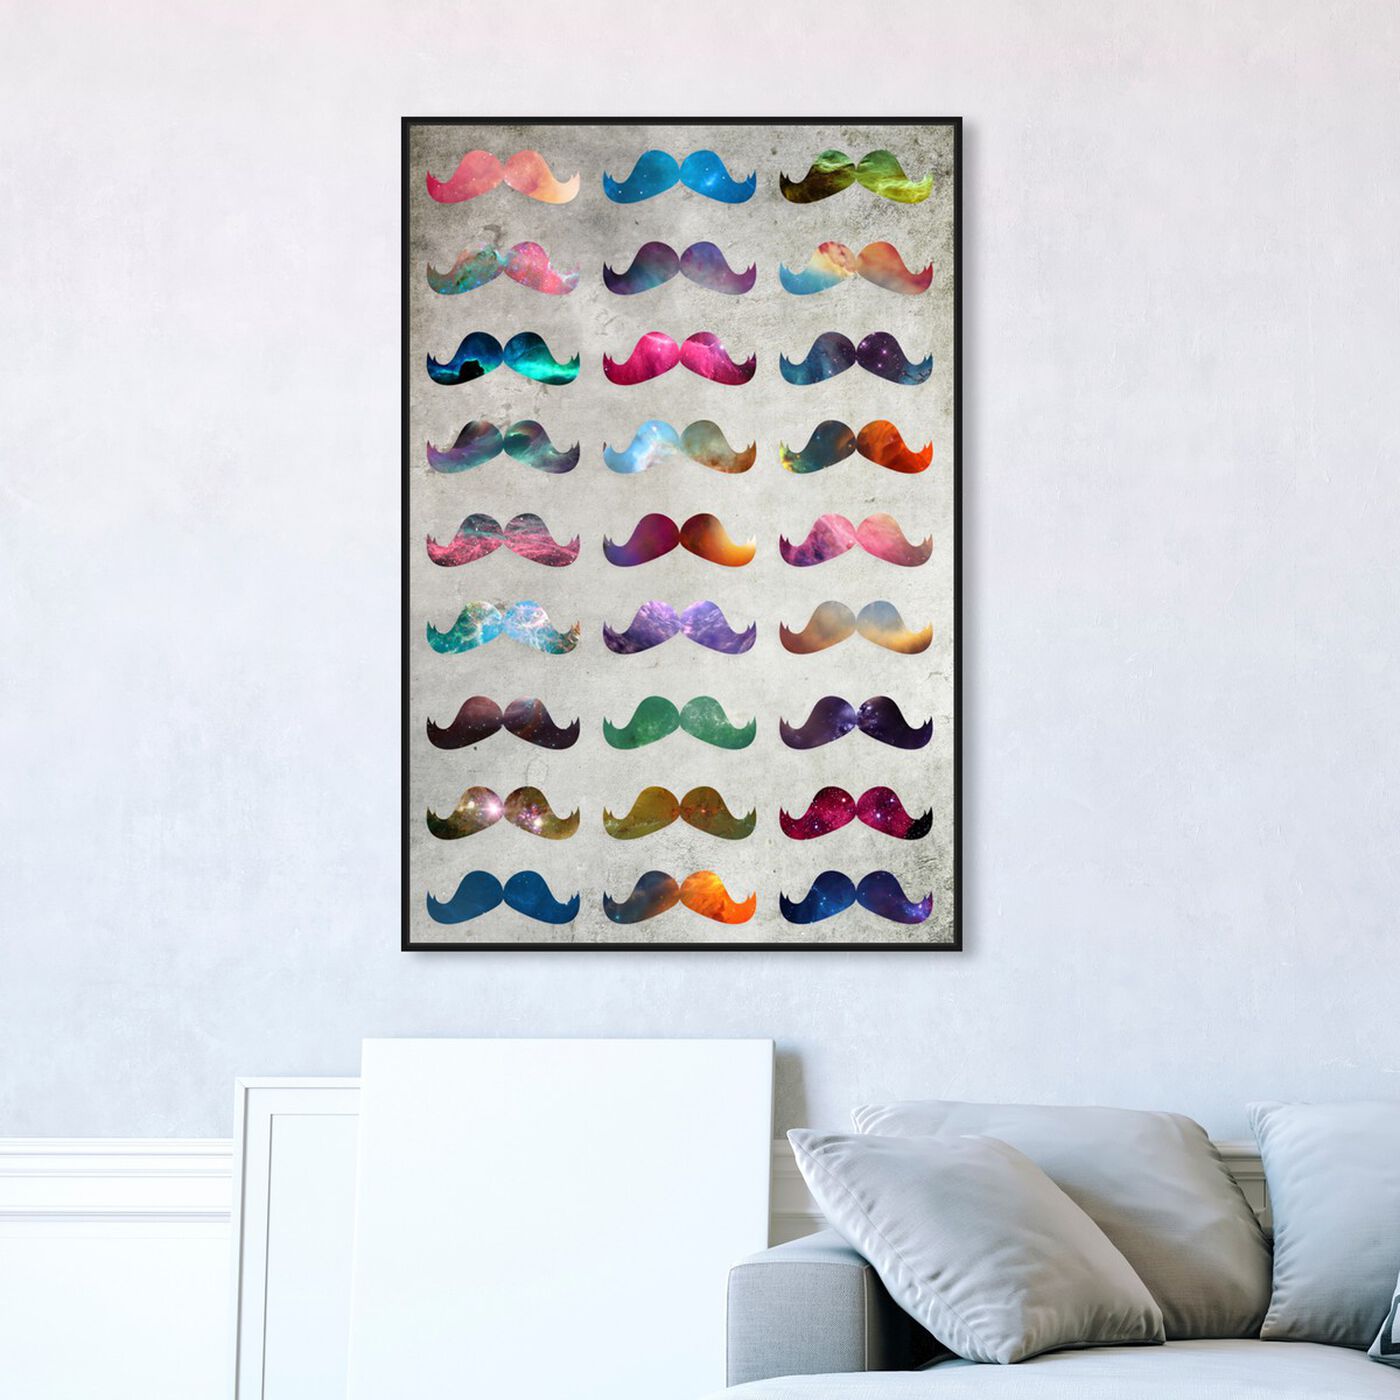 Hanging view of Moustache Madness featuring abstract and shapes art.